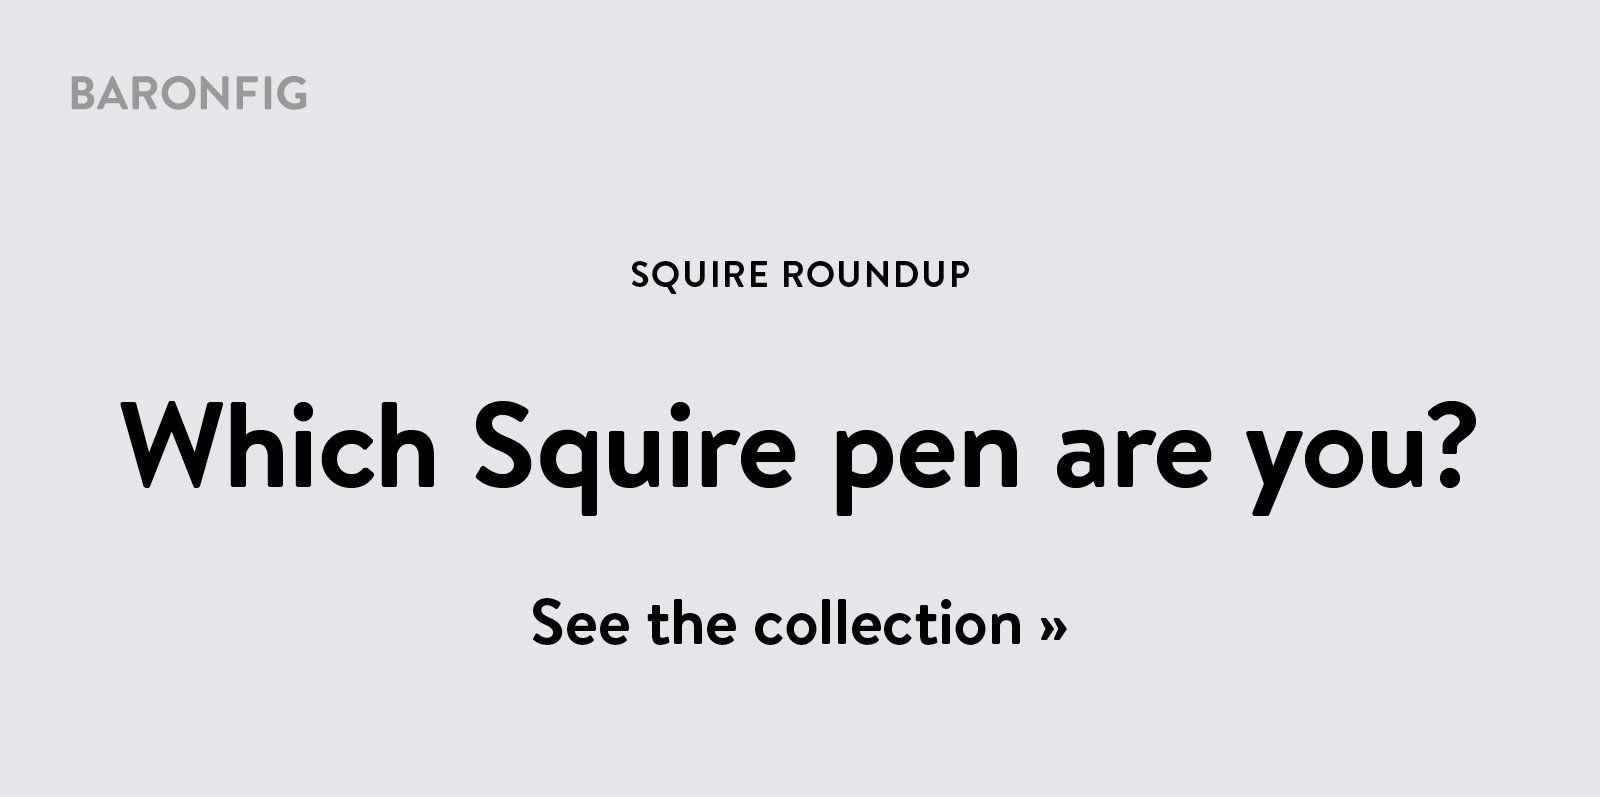 Squire Roundup. See the collection ?